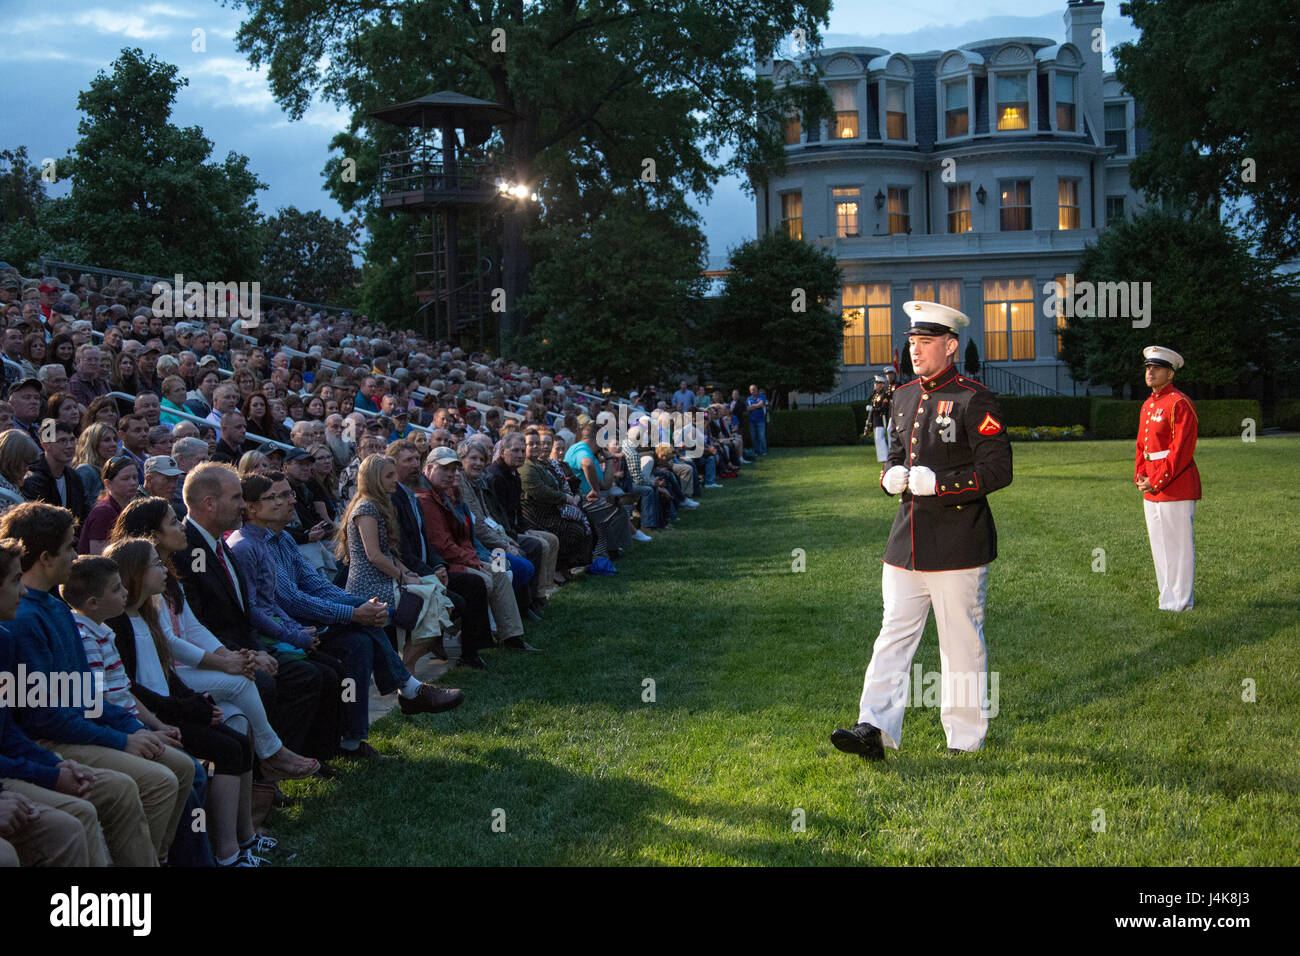 Crowd educators with Marine Barracks Washington D.C. give guests a brief history of the Barracks during a Friday Evening Parade at Marine Barracks Washington D.C., May 5, 2017. The guests of honor for the parade were the Honorable Paul Cook, California’s 8th Congressional District Congressman, the Honorable Jack Bergman, Michigan’s 1st Congressional District Congressman, and the Honorable Salud Carbajal, California’s 24th Congressional District Congressman. The hosting official was Gen. Glenn Walters, assistant commandant of the Marine Corps. (Official Marine Corps photo by Cpl. Robert Knapp/R Stock Photo